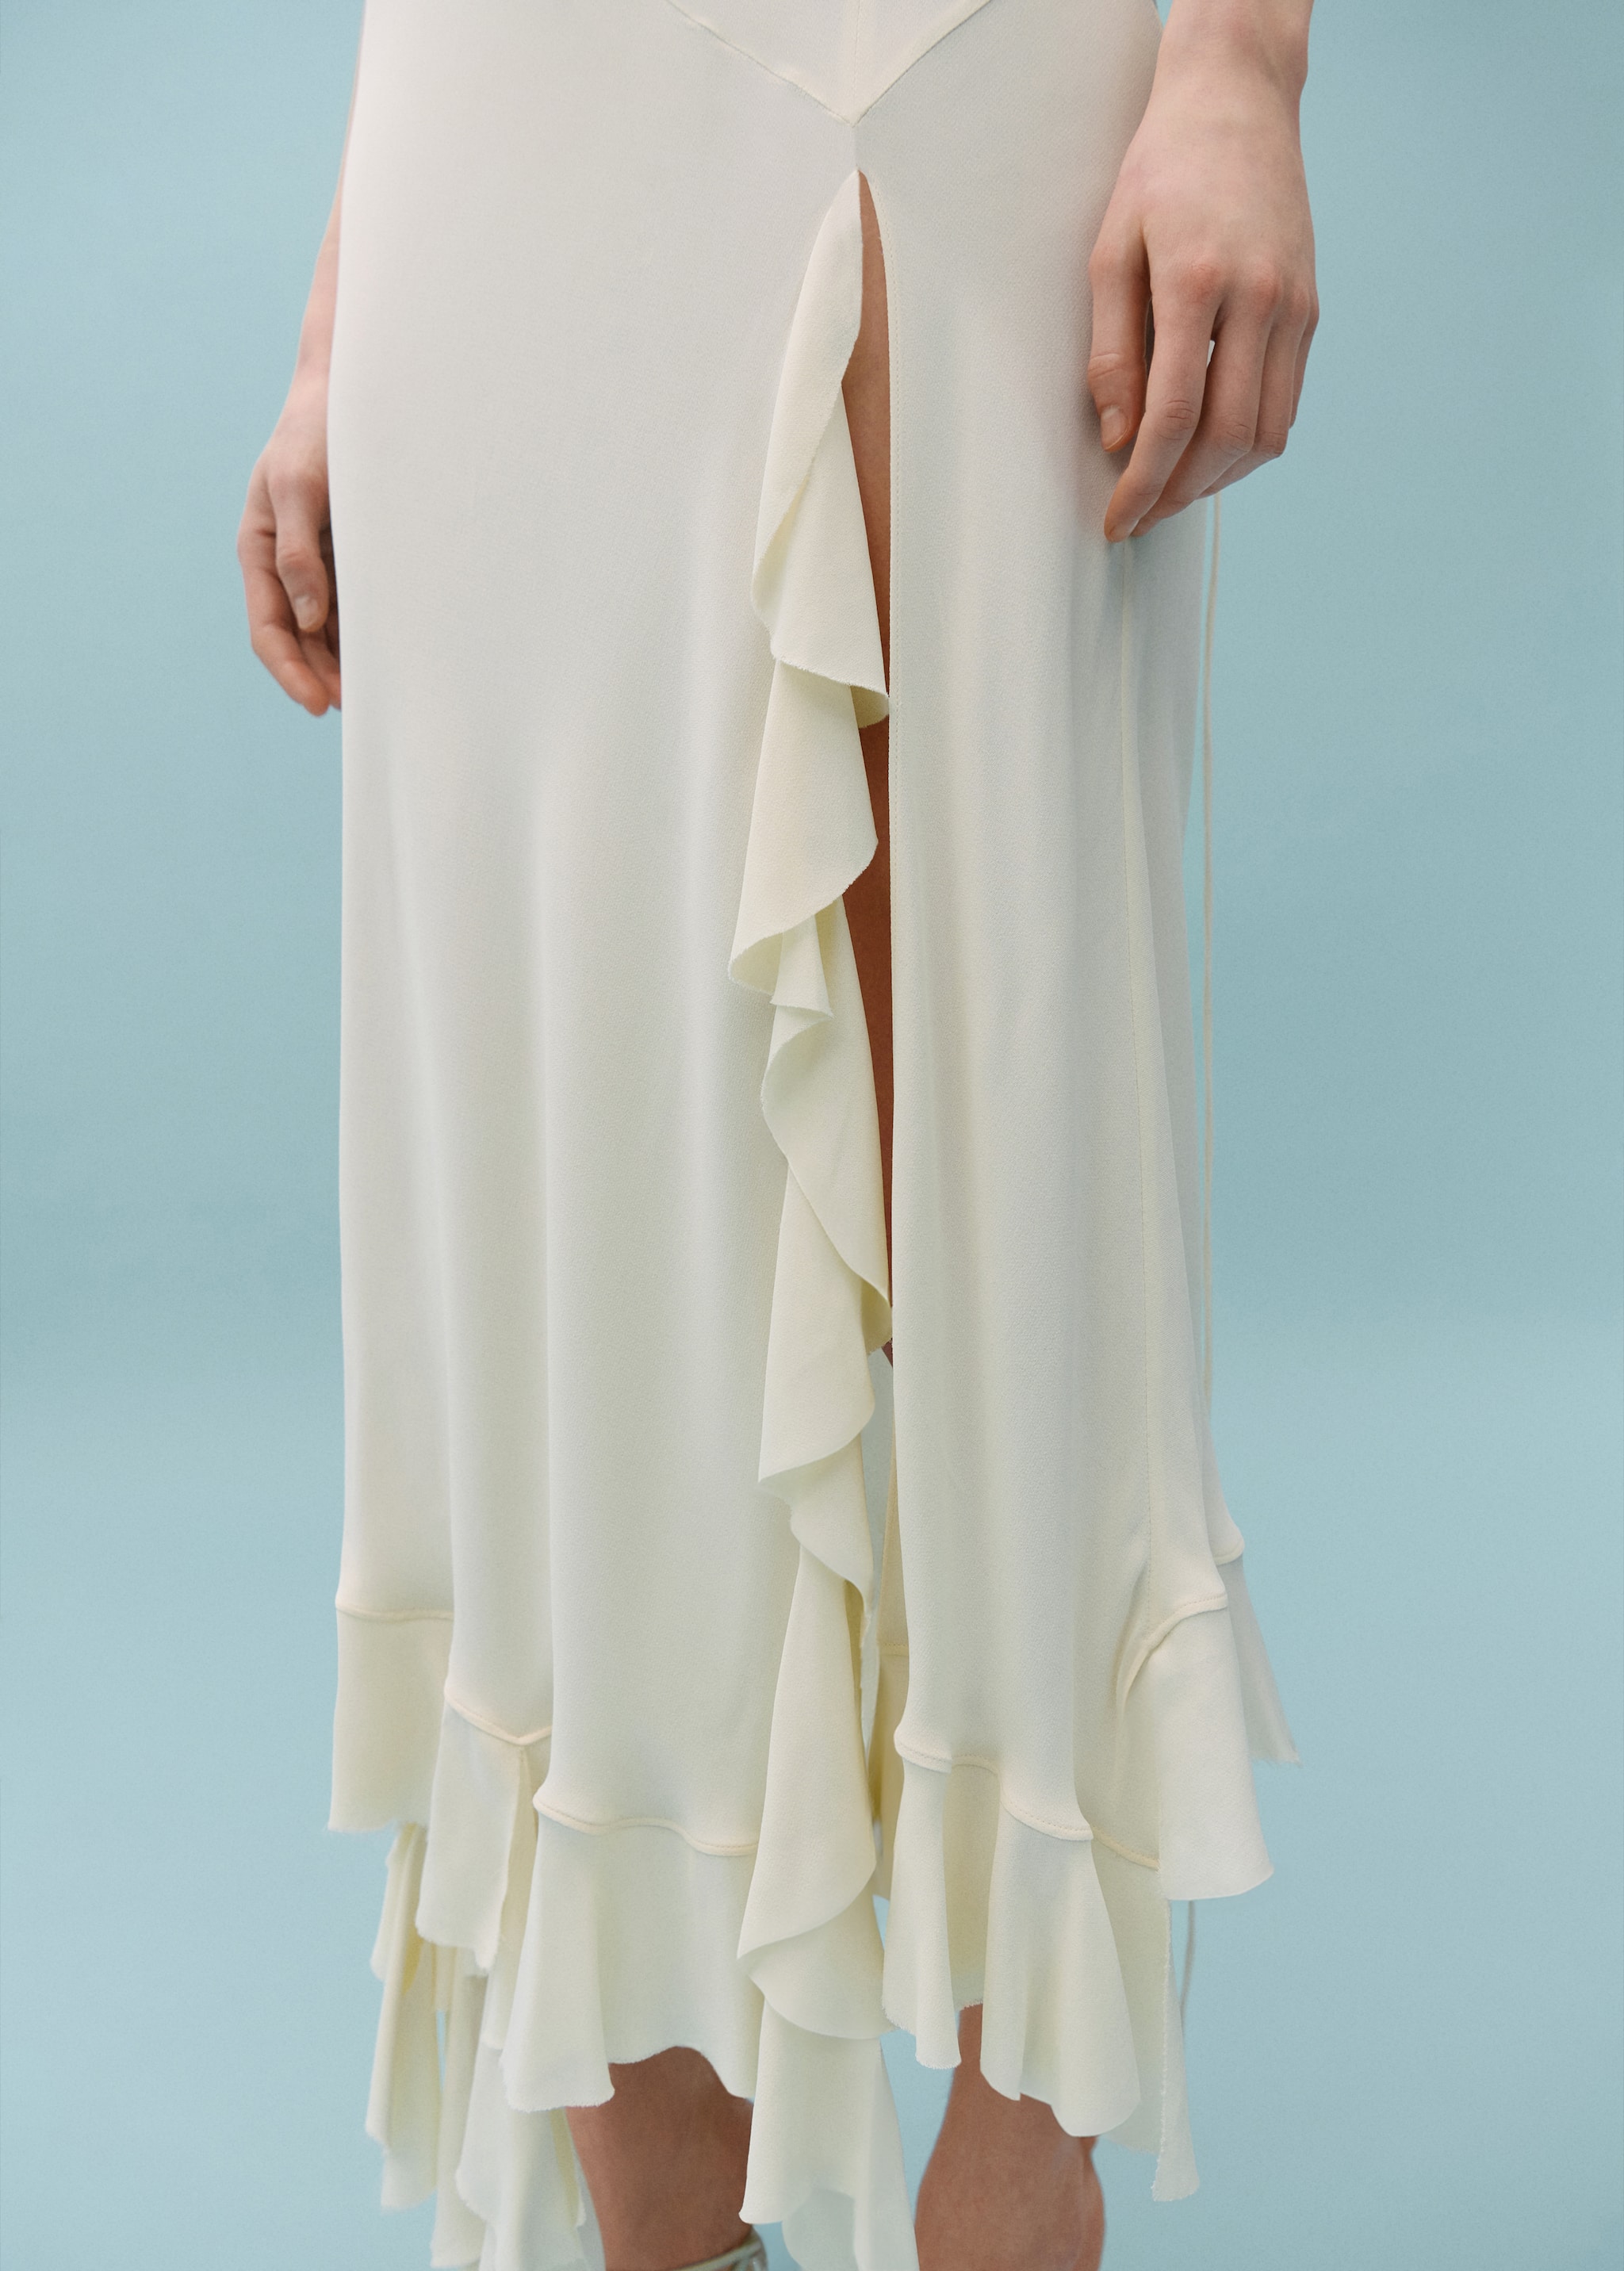 Asymmetric ruffled dress - Details of the article 6